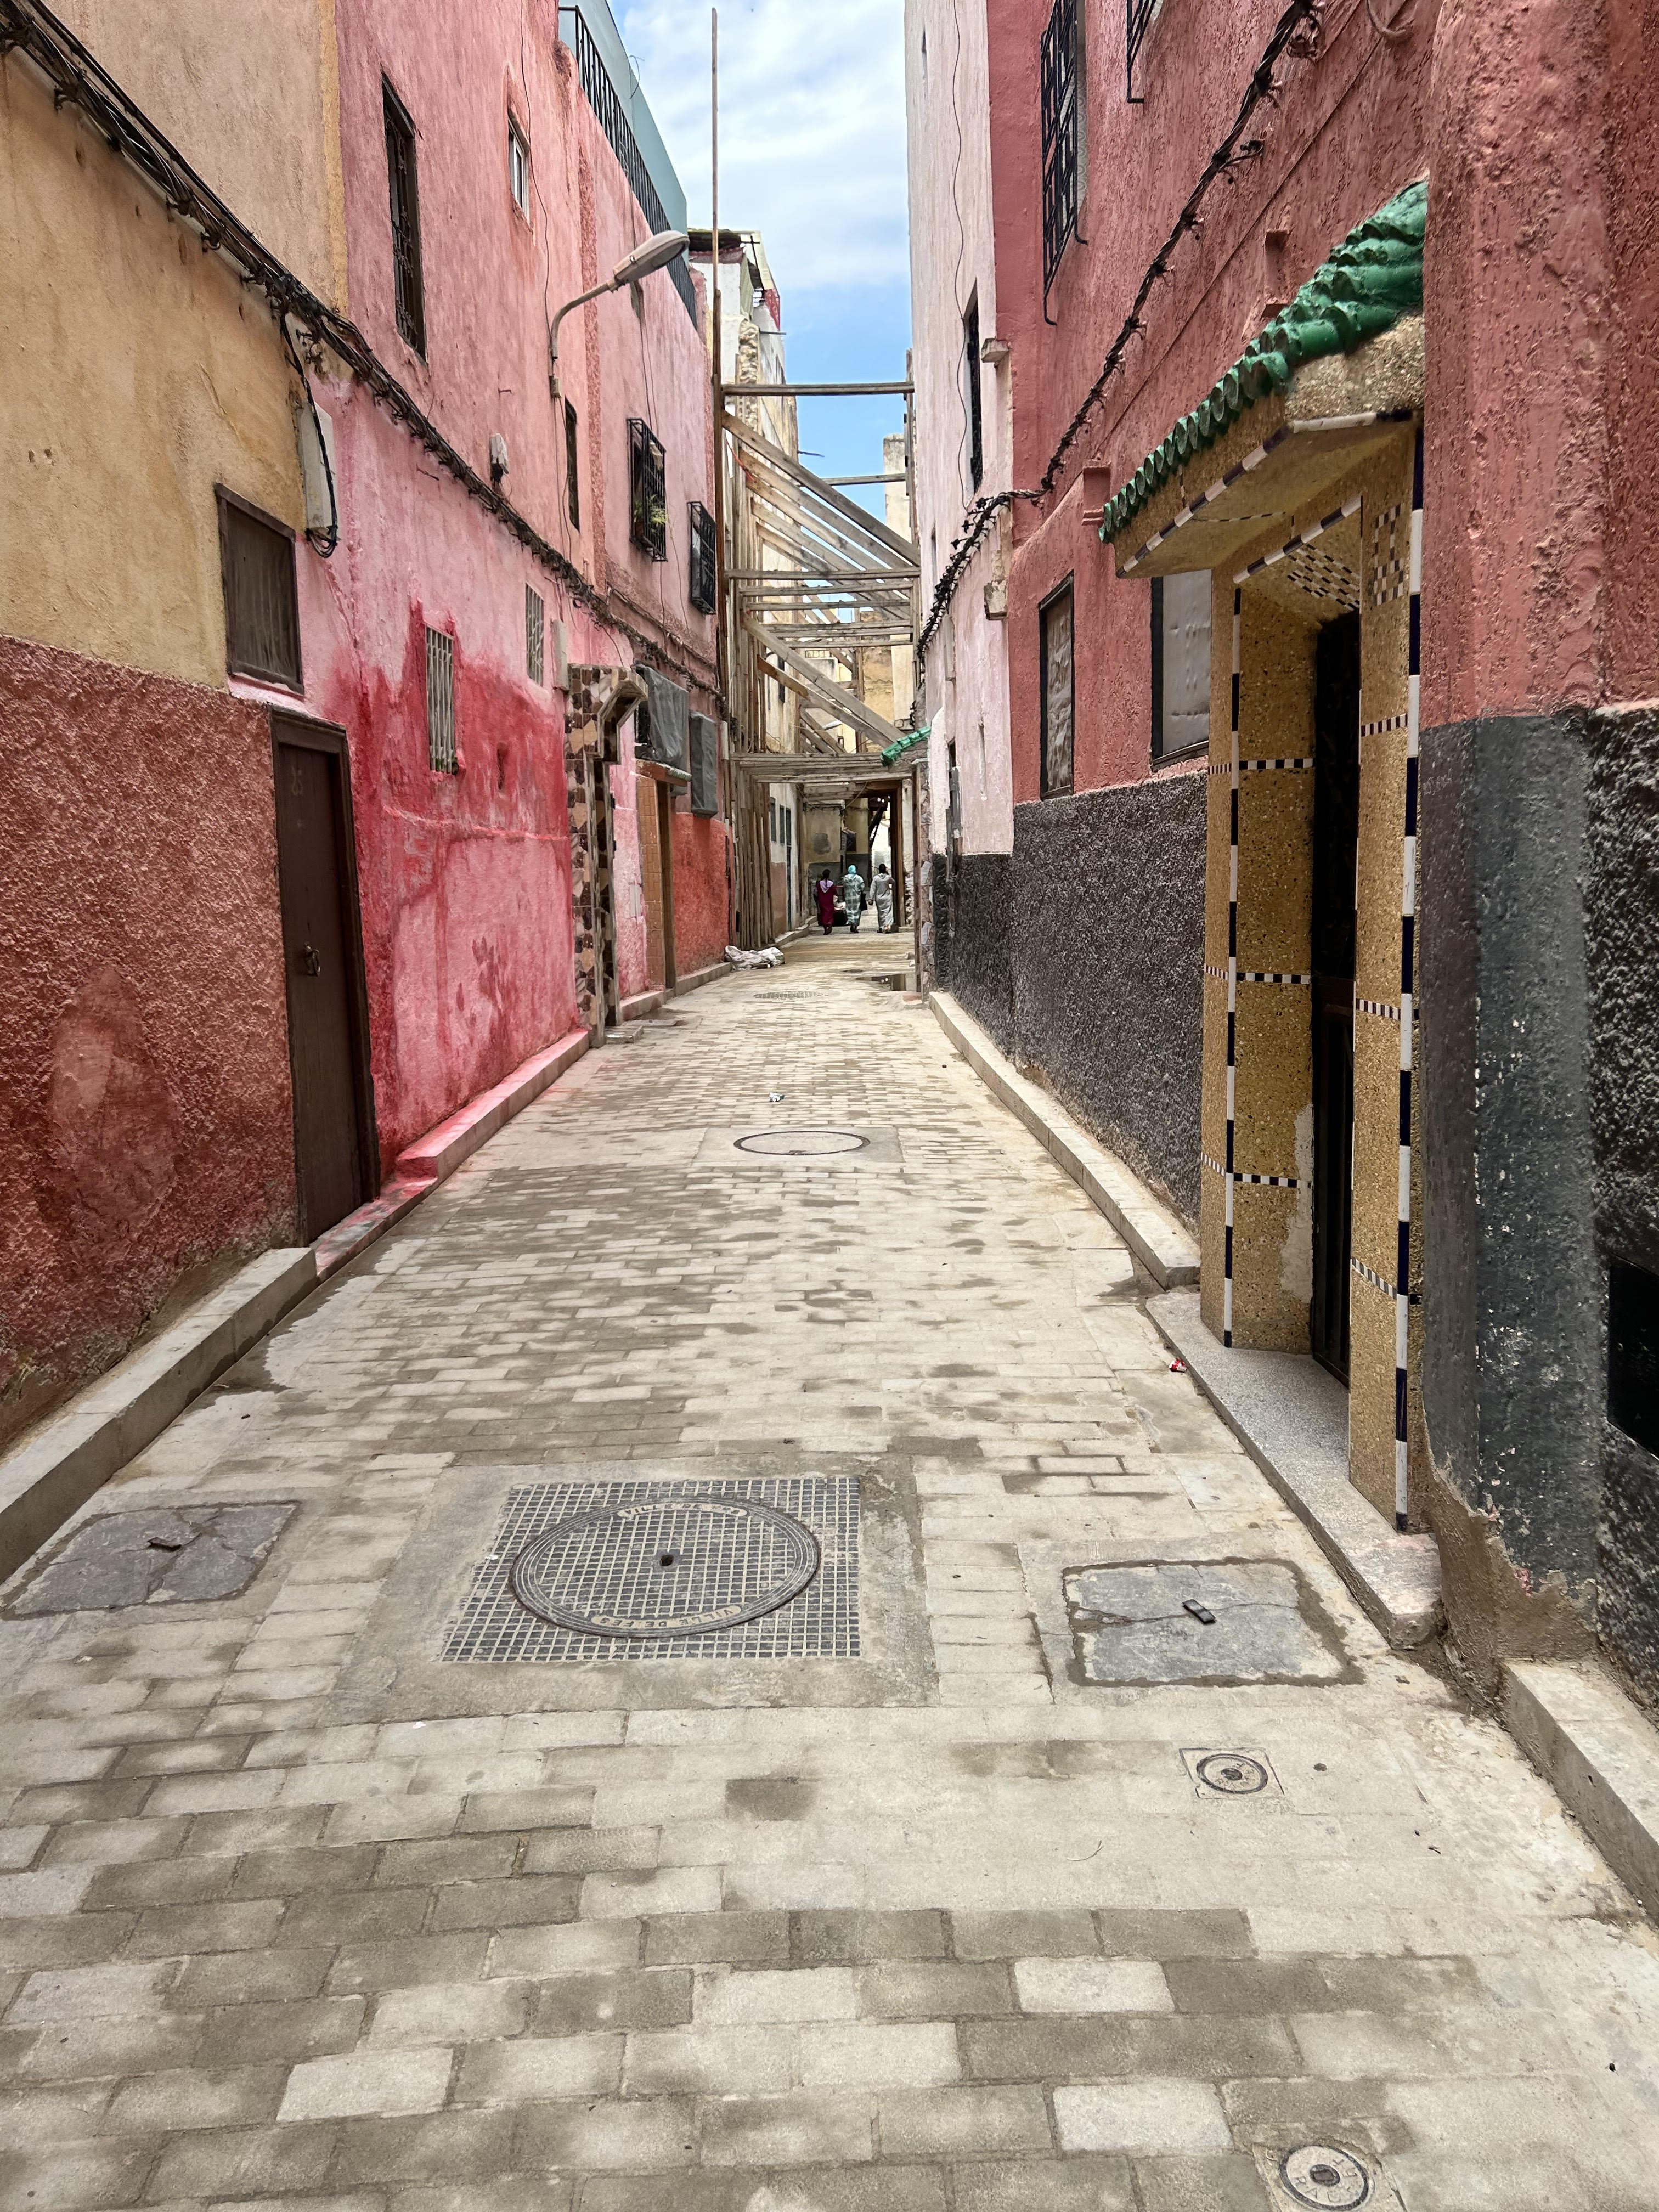 Alleyway in Fes with colorful walls and brick road.